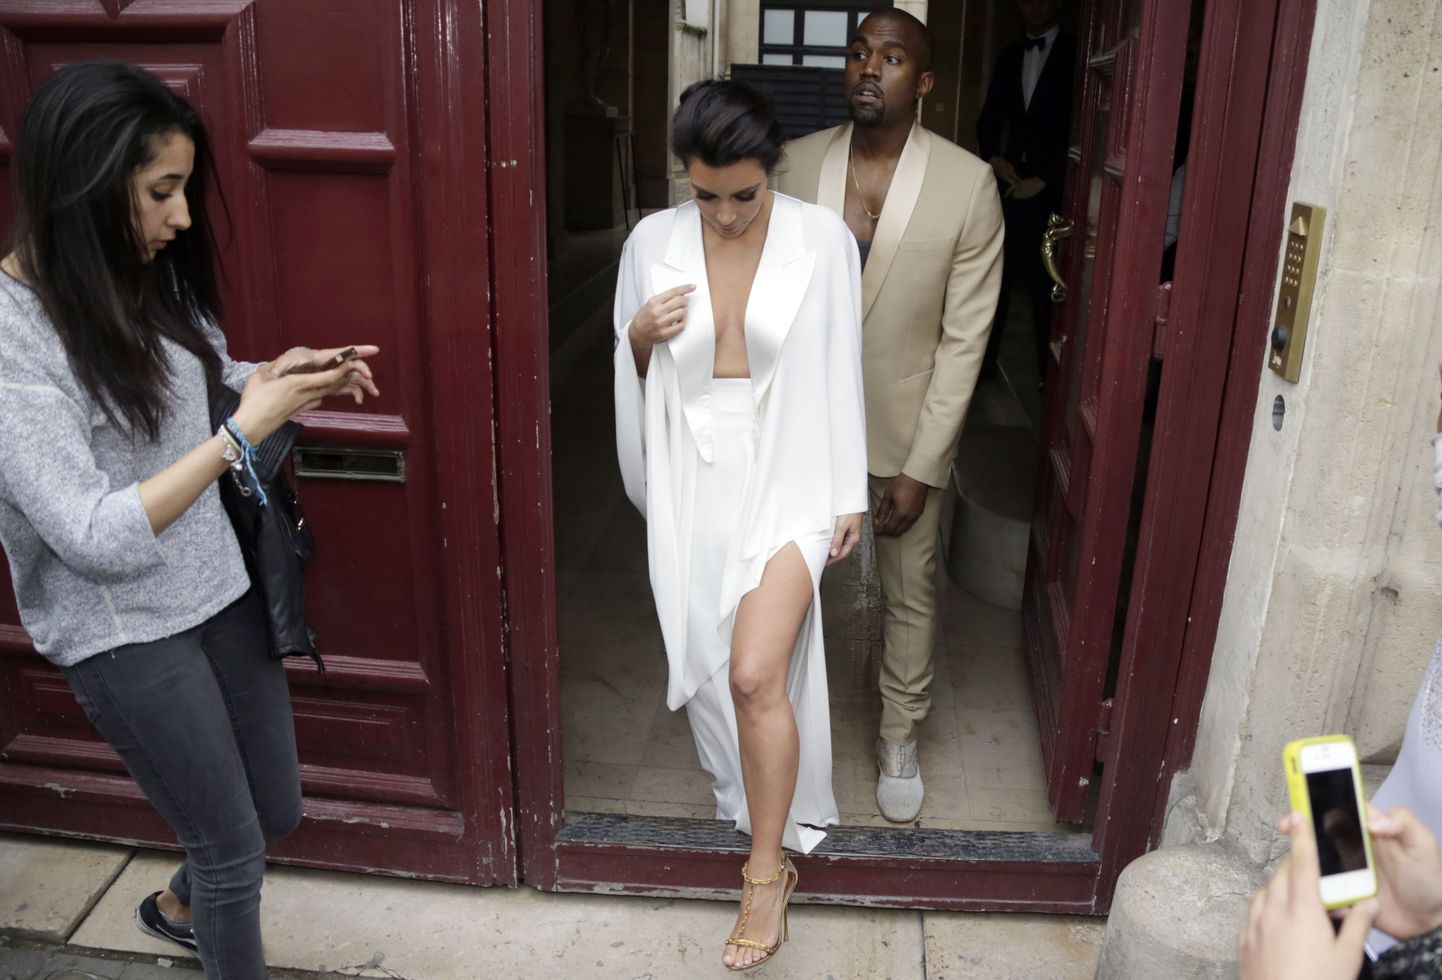 TOPSHOTS
American reality TV star Kim Kardashian (L) and American singer Kanye West (R) leave their residence in Paris on May 23, 2014, ahead of their wedding. Kanye West and his bride-to-be Kim Kardashian lunched on May 23 at a French chateau owned by iconic designer Valentino, kicking off a marathon celebration expected to culminate in the wedding of the year. AFP PHOTO / KENZO TRIBOUILLARD